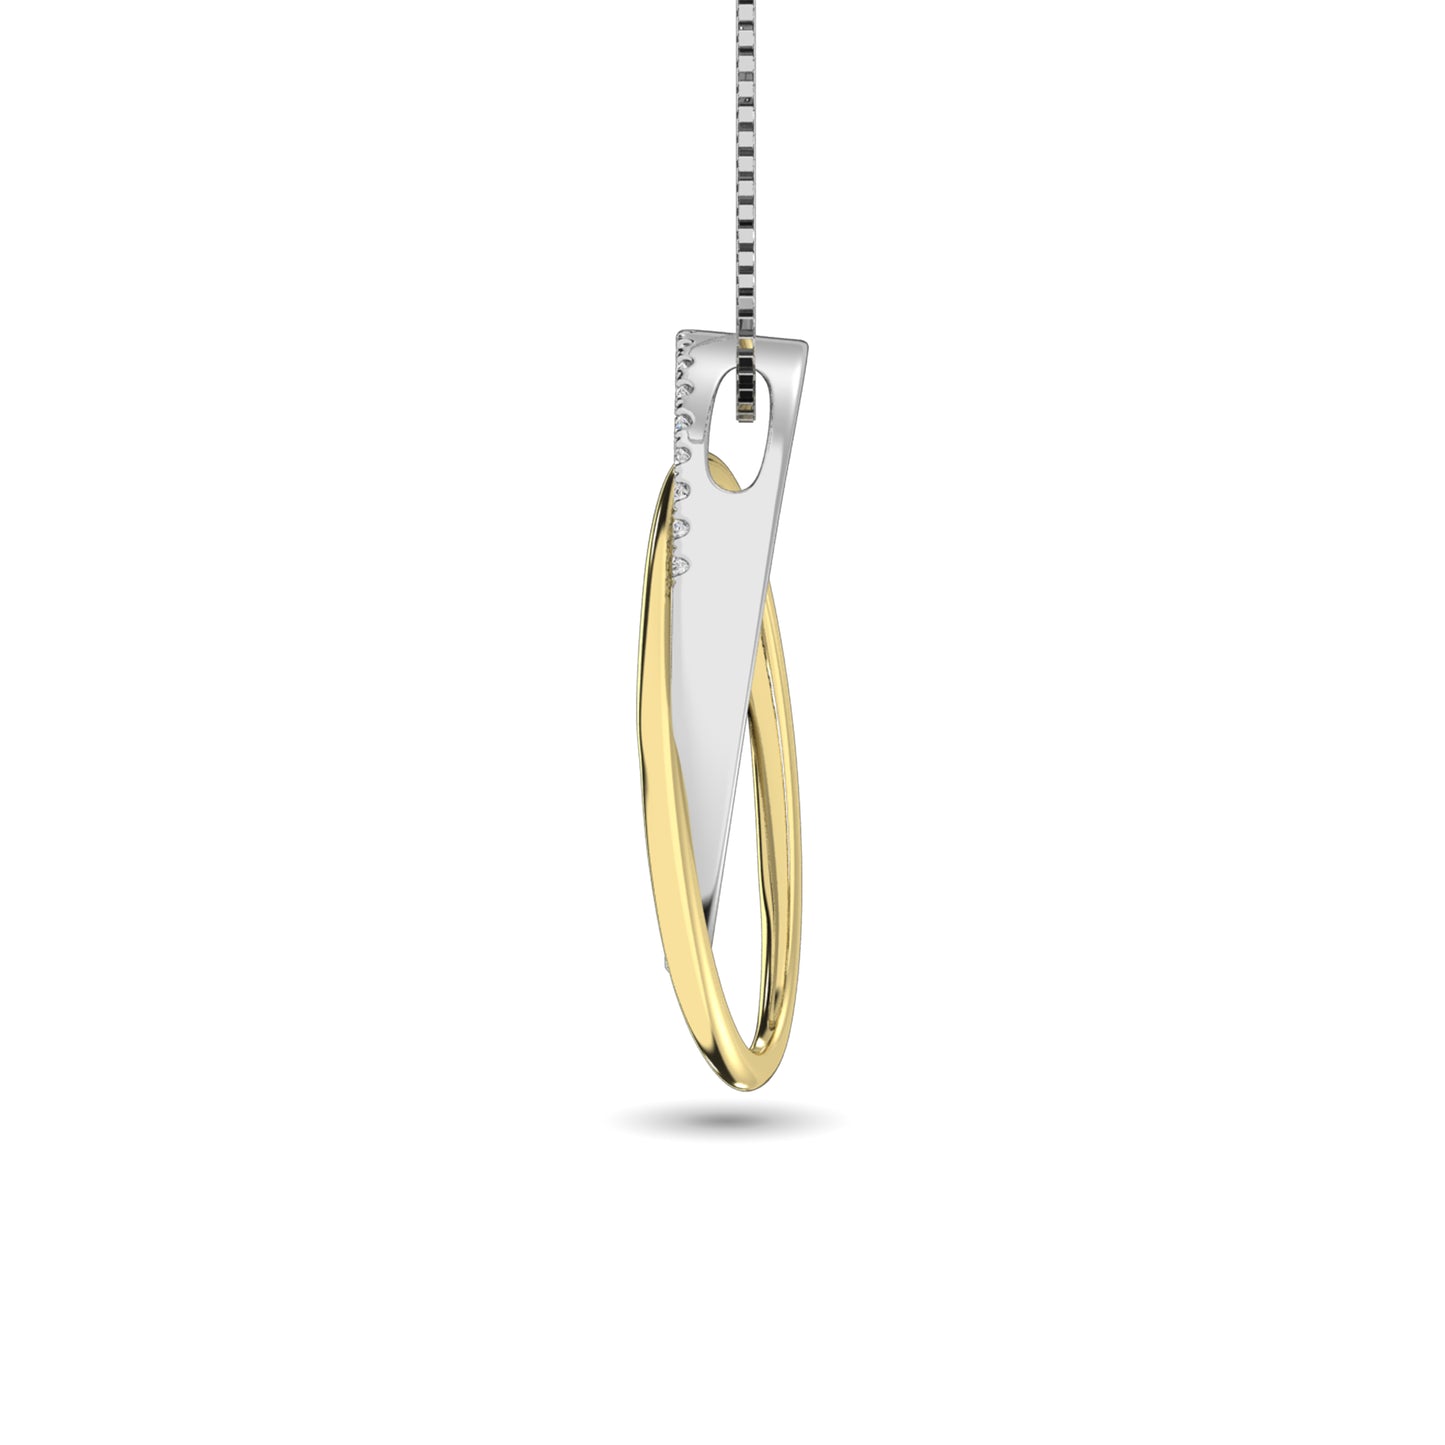 Diamond 1/6 ct tw Oval Shape Pendant in 14K Two Tone Gold